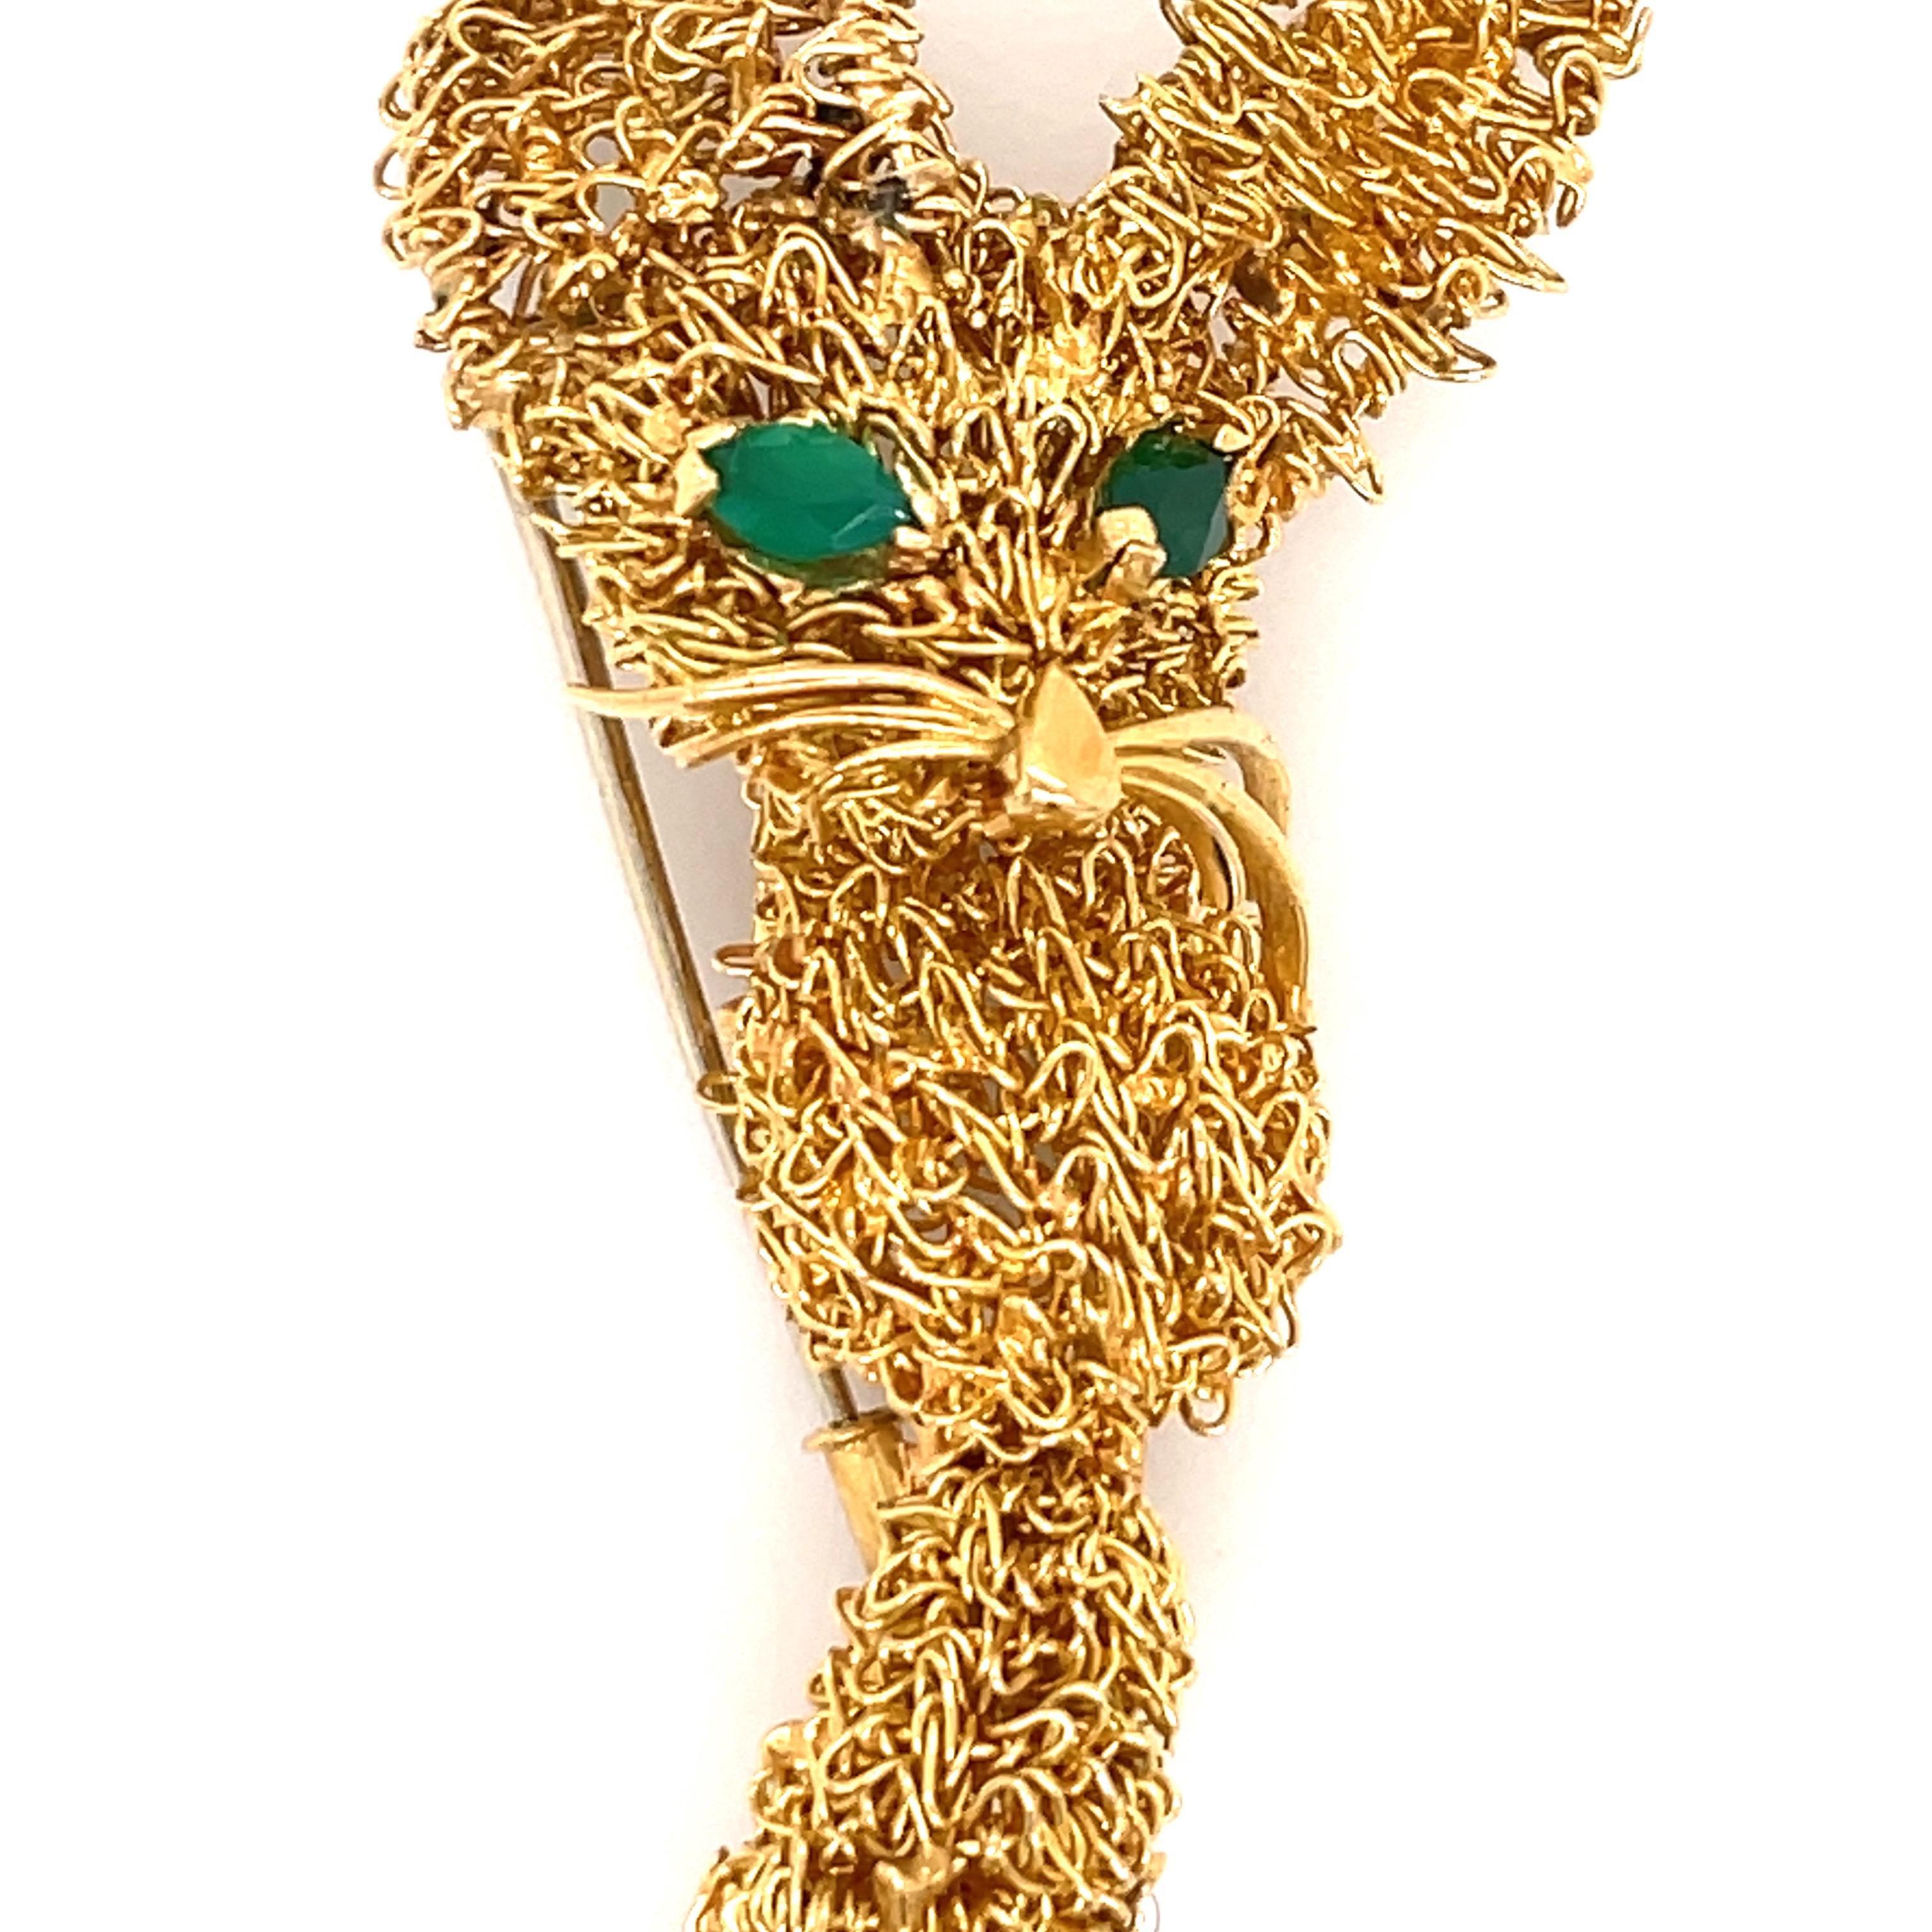 Stamped VAN CLEEF & ARPELS, this fennec has a gold wire body decorated with cabochon emeralds eyes.
Signed Van Cleef & Arpels, numbered, French assay mark for gold.
Measurements:
Length: 2.75 Inches
Width of Head 1.13 Inches
Body 0.50 Inches
Bottom